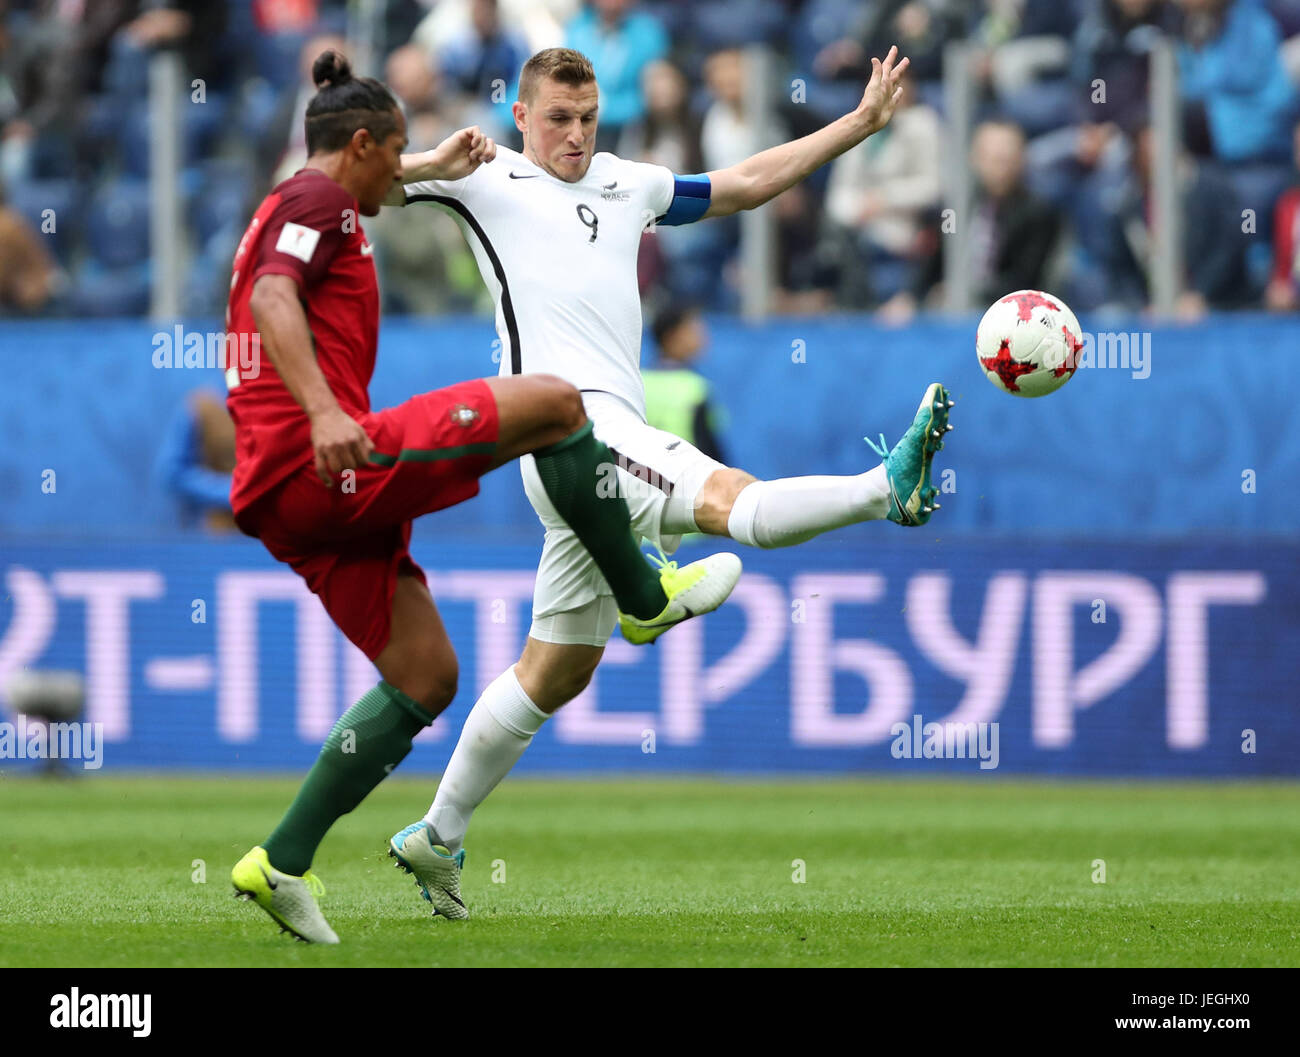 St. Petersburg, Russia. 24th June, 2017. Chris Wood (R) of New Zealand vies with Bruno Alves of Portugal during the group A match between New Zealand and Portugal of the 2017 FIFA Confederations Cup in St. Petersburg, Russia, on June 24, 2017. Portugal won 4-0. Credit: Wu Zhuang/Xinhua/Alamy Live News Stock Photo